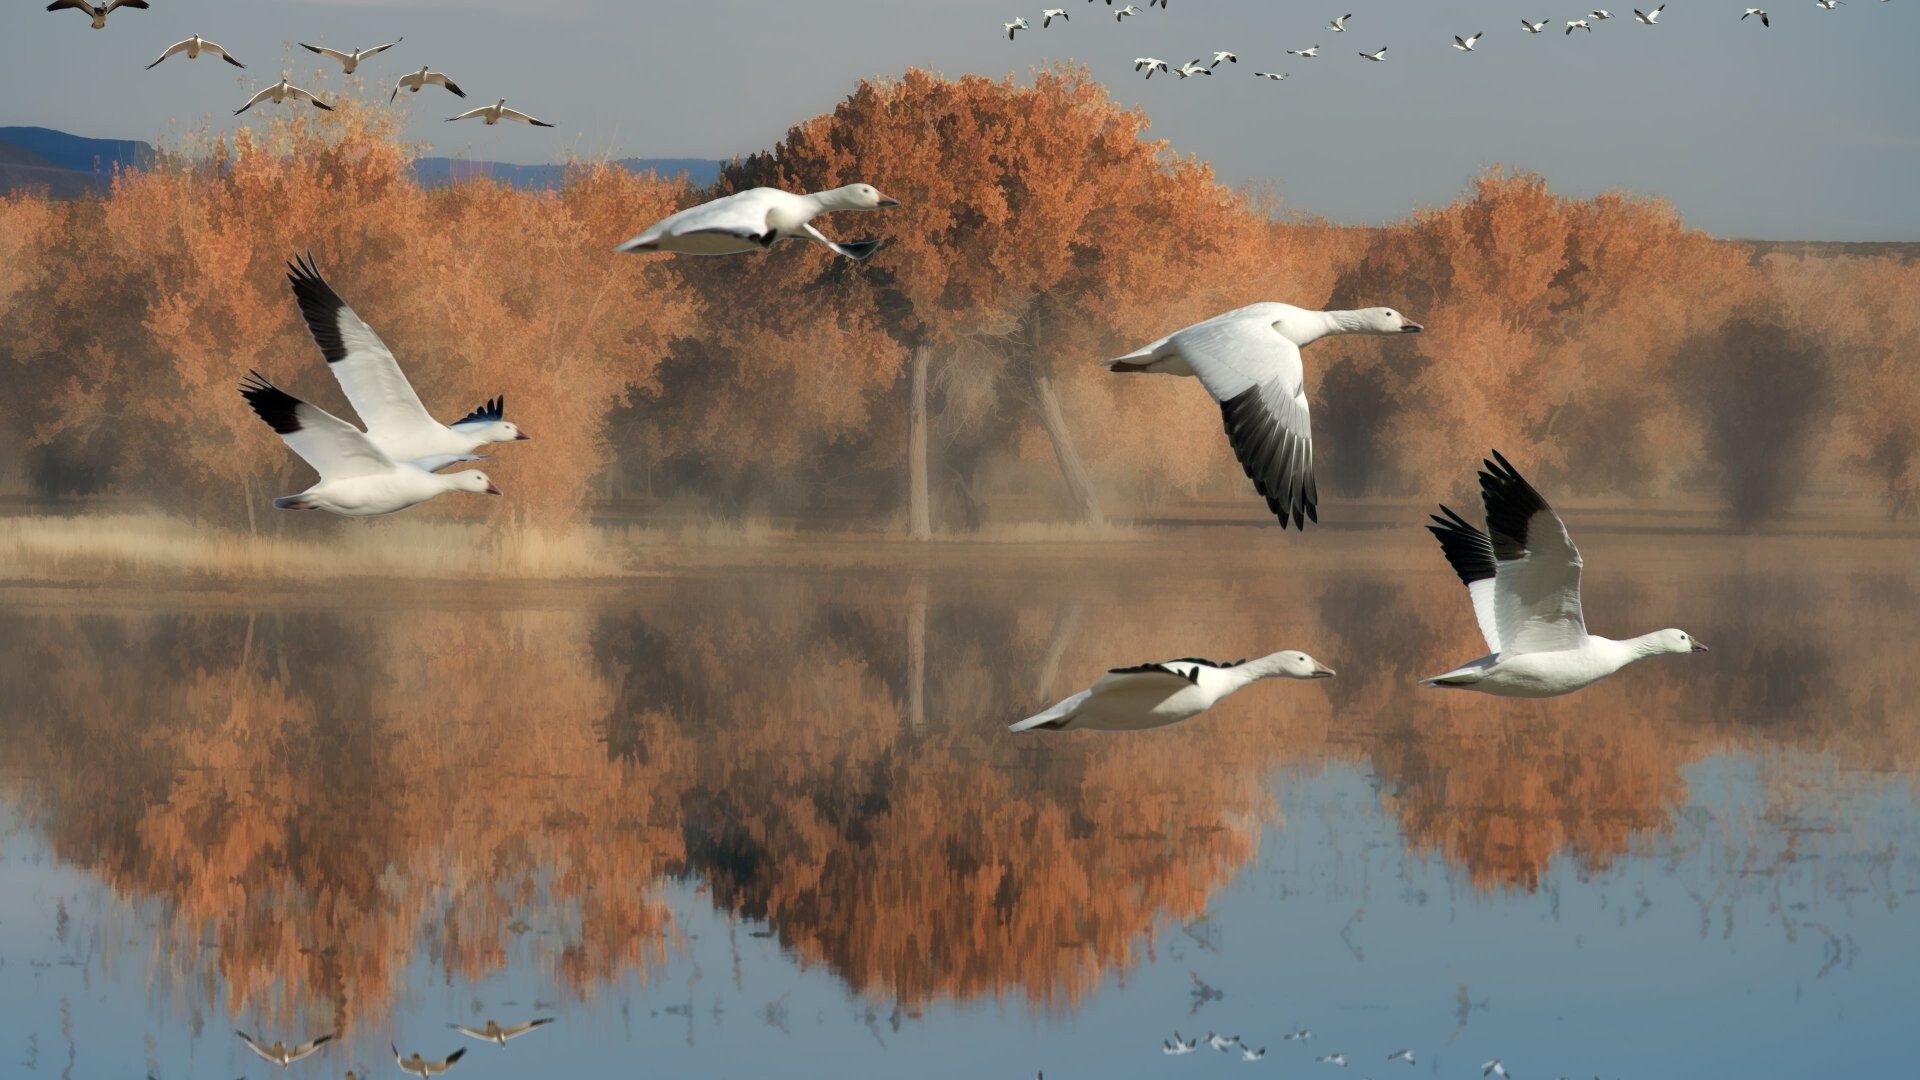 Geese: Web-footed long-necked typically gregarious migratory aquatic birds. 1920x1080 Full HD Wallpaper.